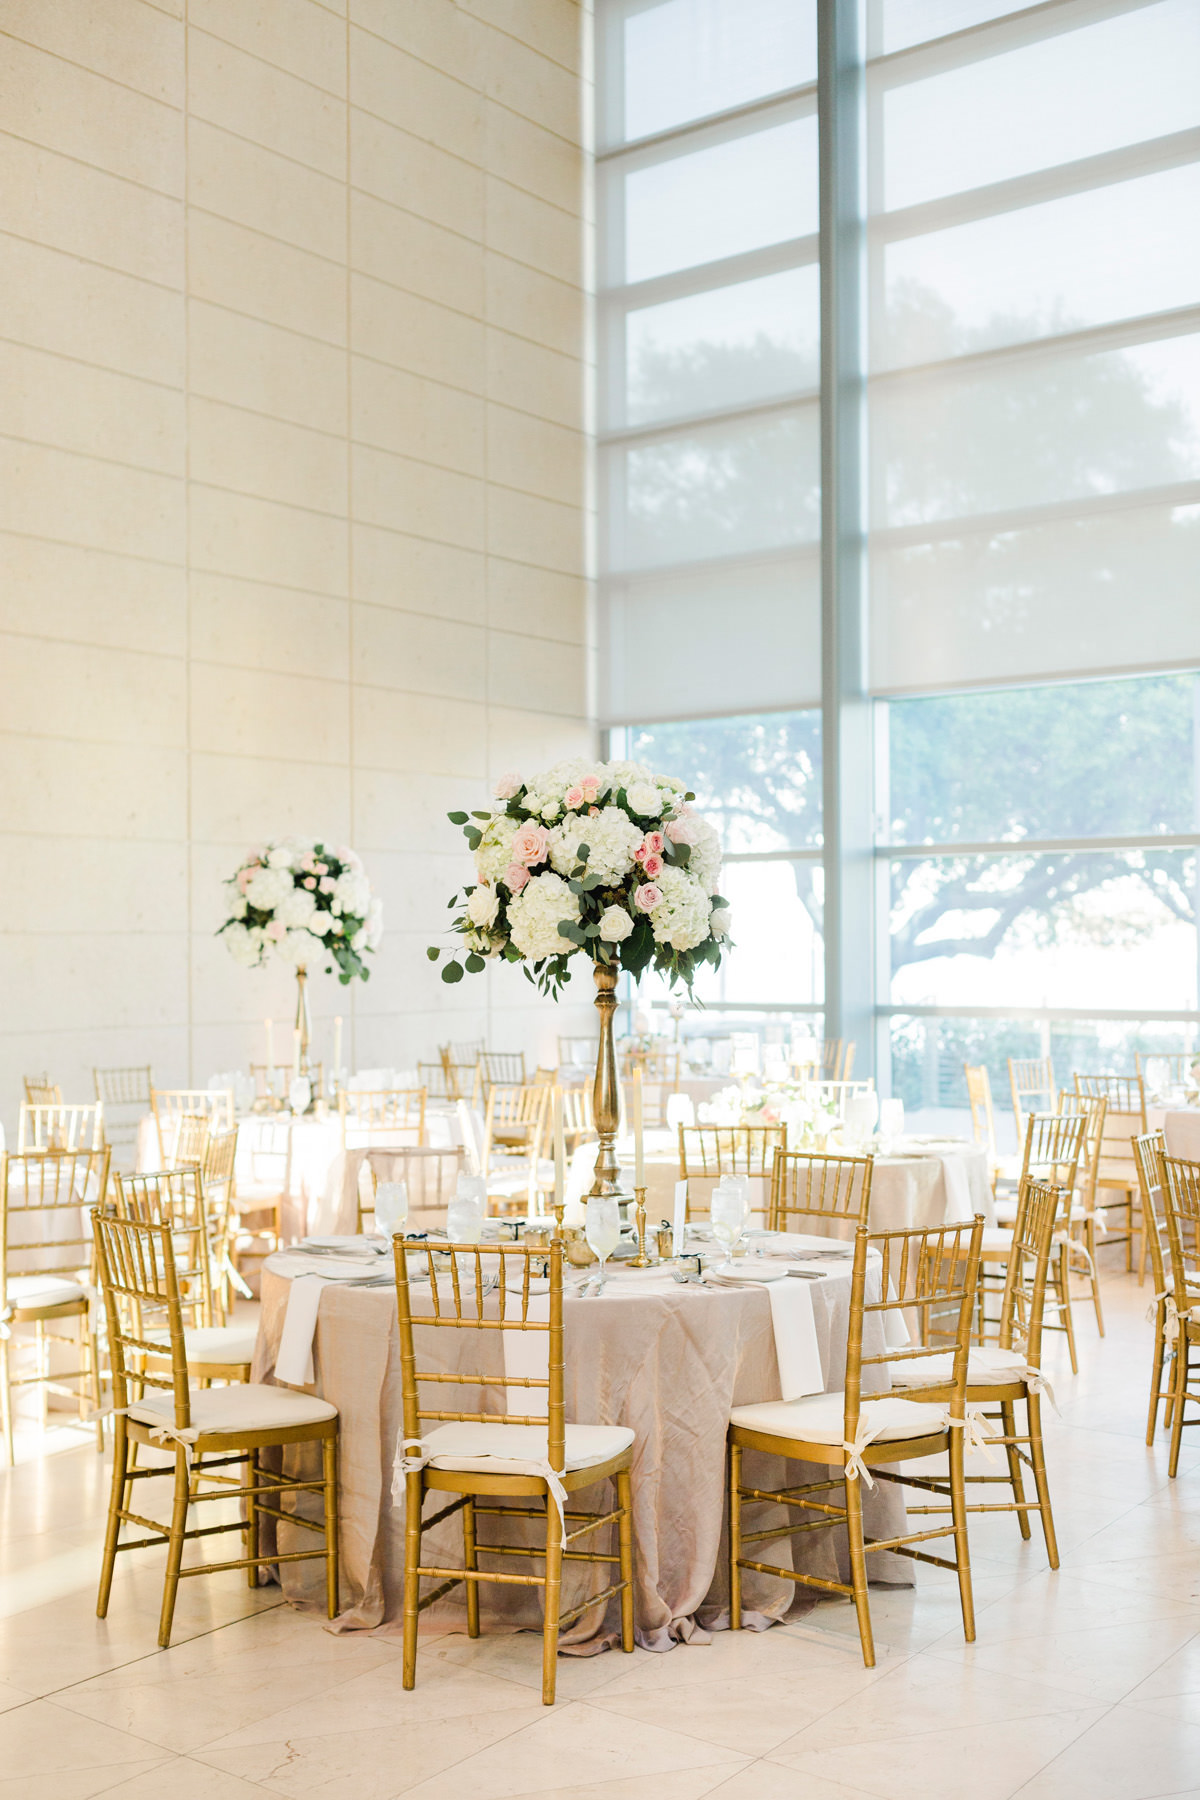 St. Pete Wedding Venue Museum of Fine Arts | Indoor Wedding Reception with Gold Chiavari Chairs and Tall Gold Candlestick Centerpieces with White Hydrangea and Blush Pink Roses and Eucalyptus Greenery | Bruce Wayne Florals